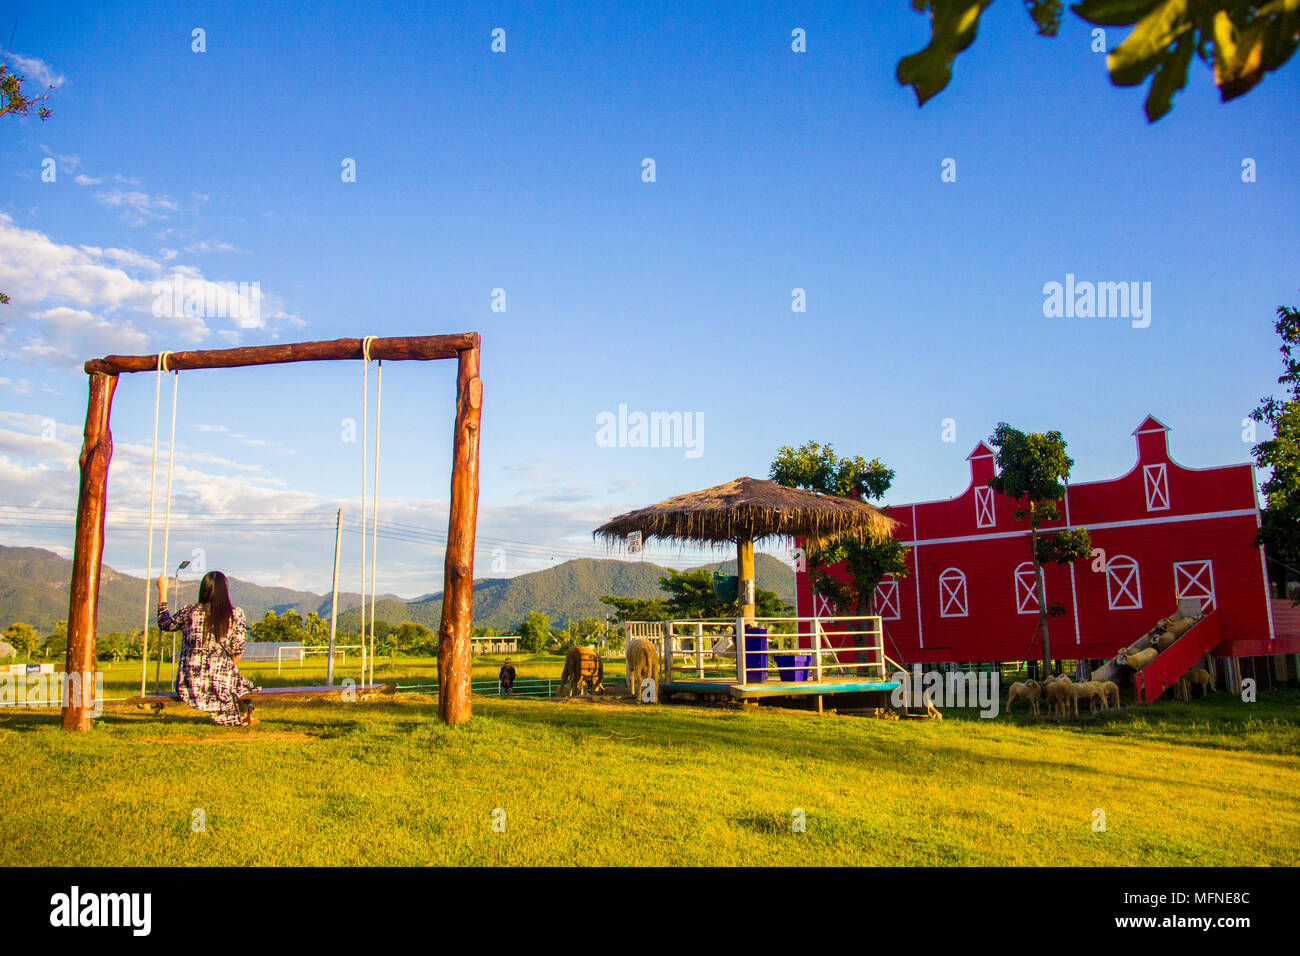 Female tourist sitting in wooden swing looking at a flock of sheep in sheep farm Stock Photo